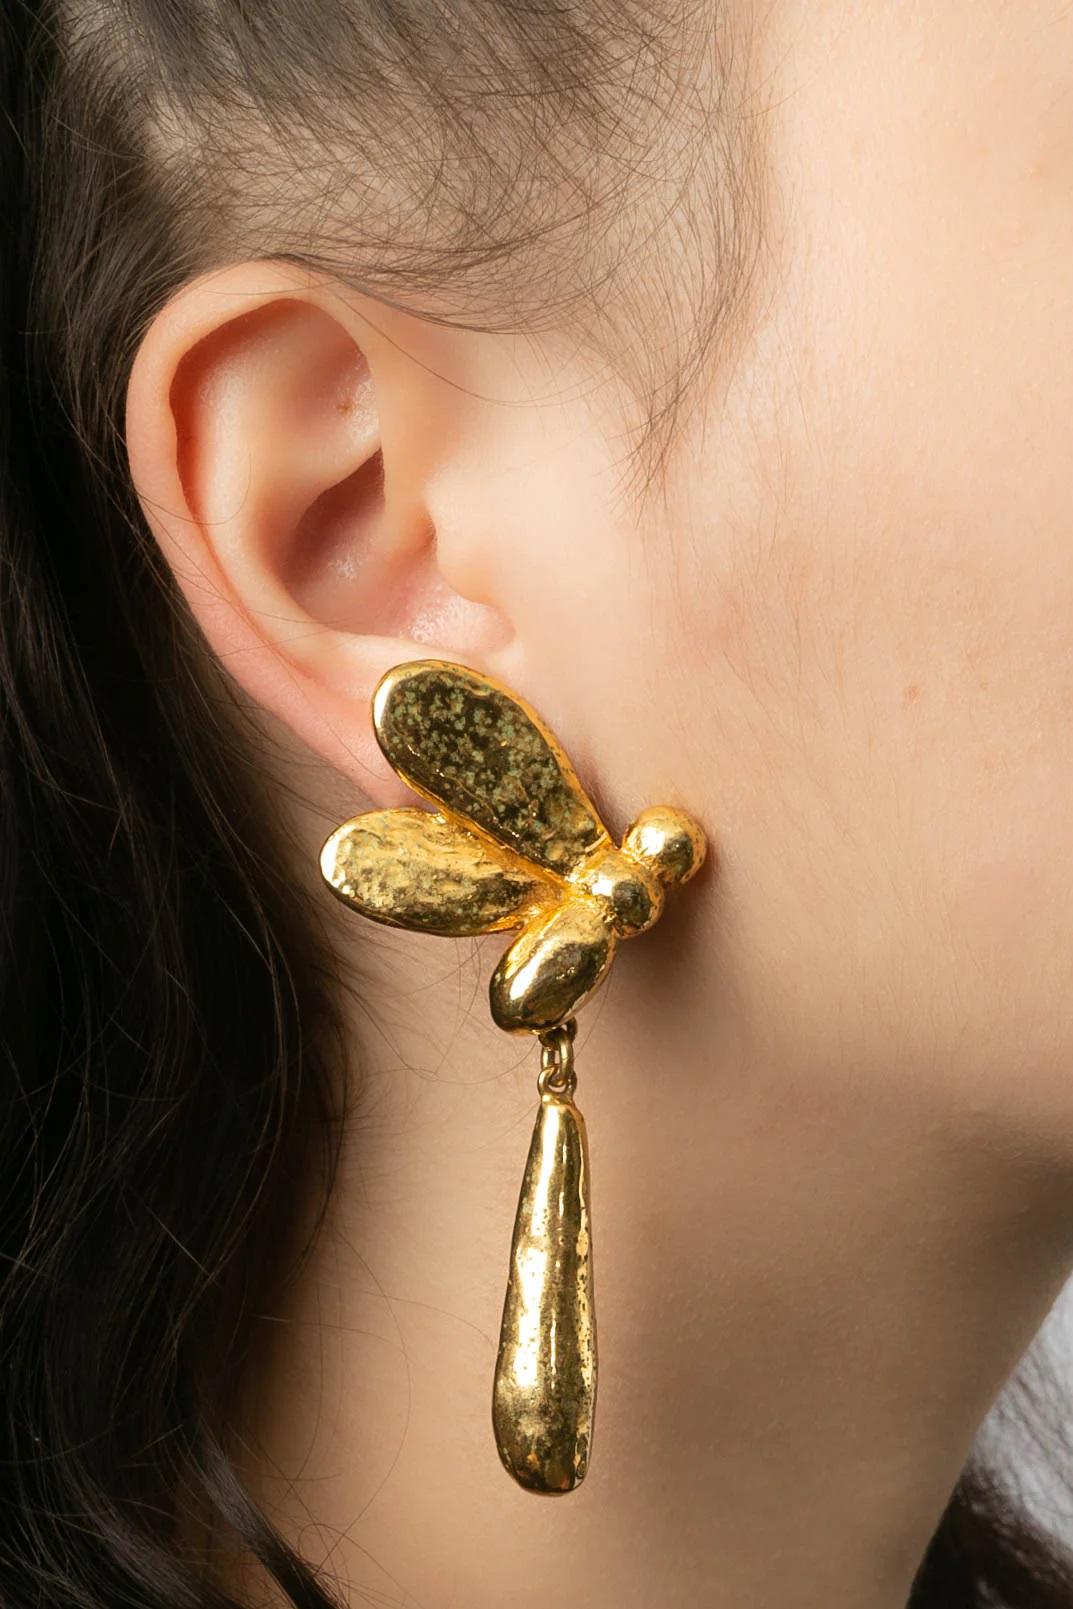 Sonia Rykiel - Clip-on gilded metal earrings representing a dragonfly. 

Additional information:

Dimensions: 
4.5 W x 7 H cm (1.77